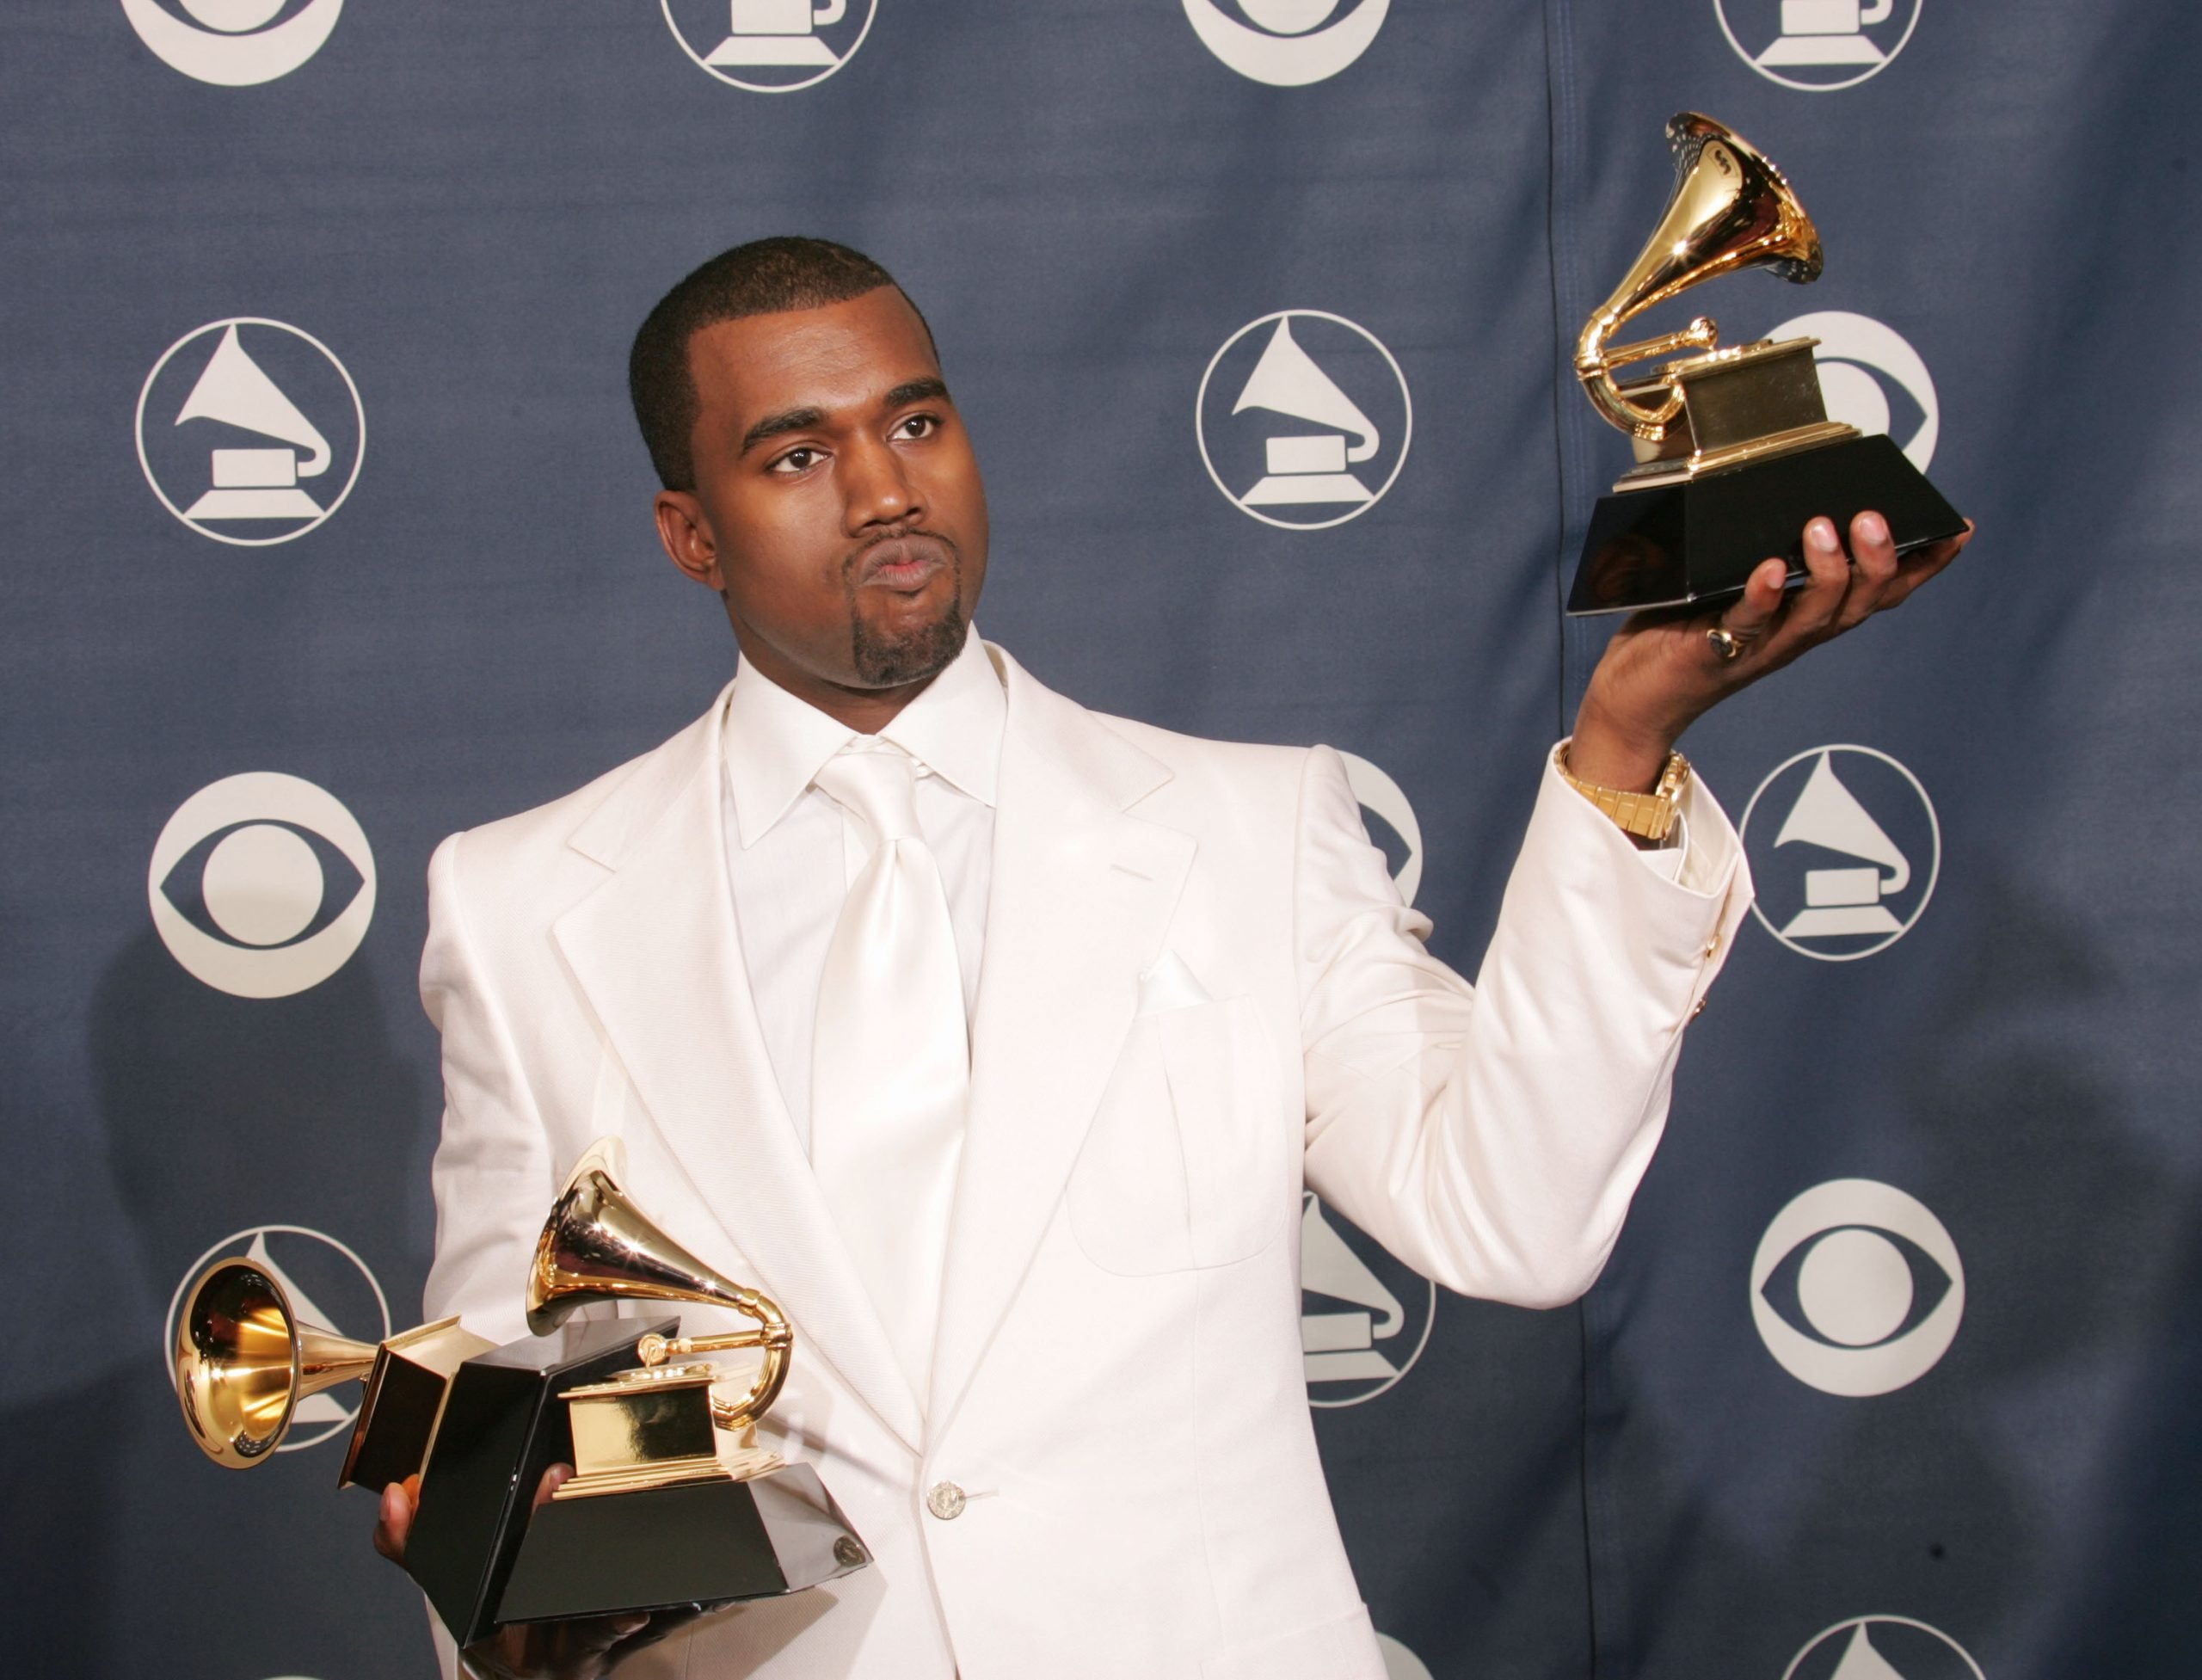 Kanye West’s Most Controversial Grammy Awards Show Moments